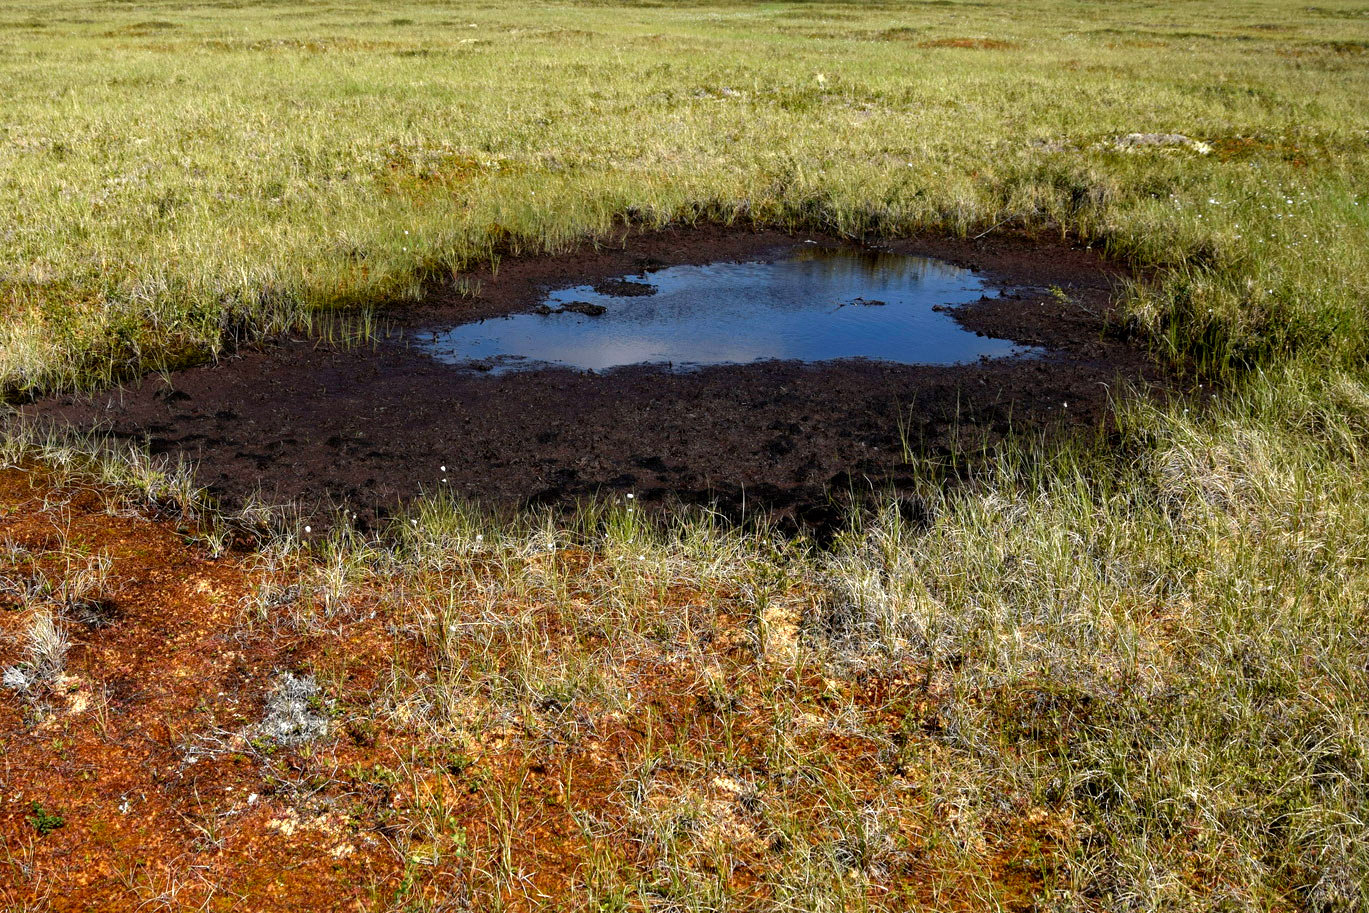 In an undated handout image, a boggy depression in Alaska's vast Yukon Delta National Wildlife Refuge, likely formed when ice in the top layer of permafrost melted. Starting just a few feet below the surface and extending tens or even hundreds of feet down, Alaska's permafrost has safely sequestered vast amounts of carbon for centuries. How quickly it is now thawing is a question of critical import. (John Schade via The New York Times)